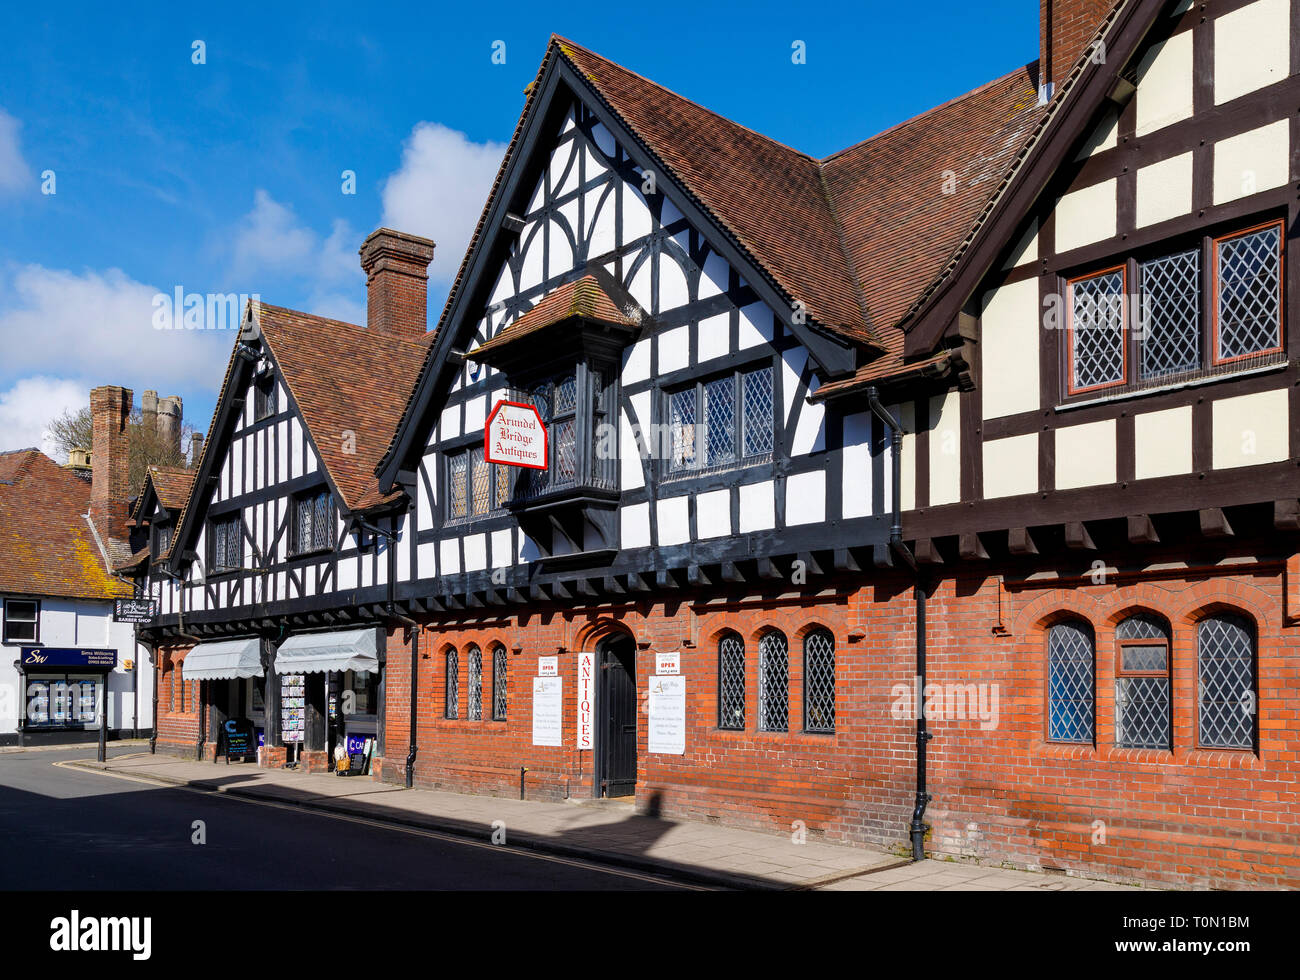 High Street, Arundel, West Sussex. Businesses within a mid C19 half timbered and red brick building with leaded windows and tiled roof. Stock Photo